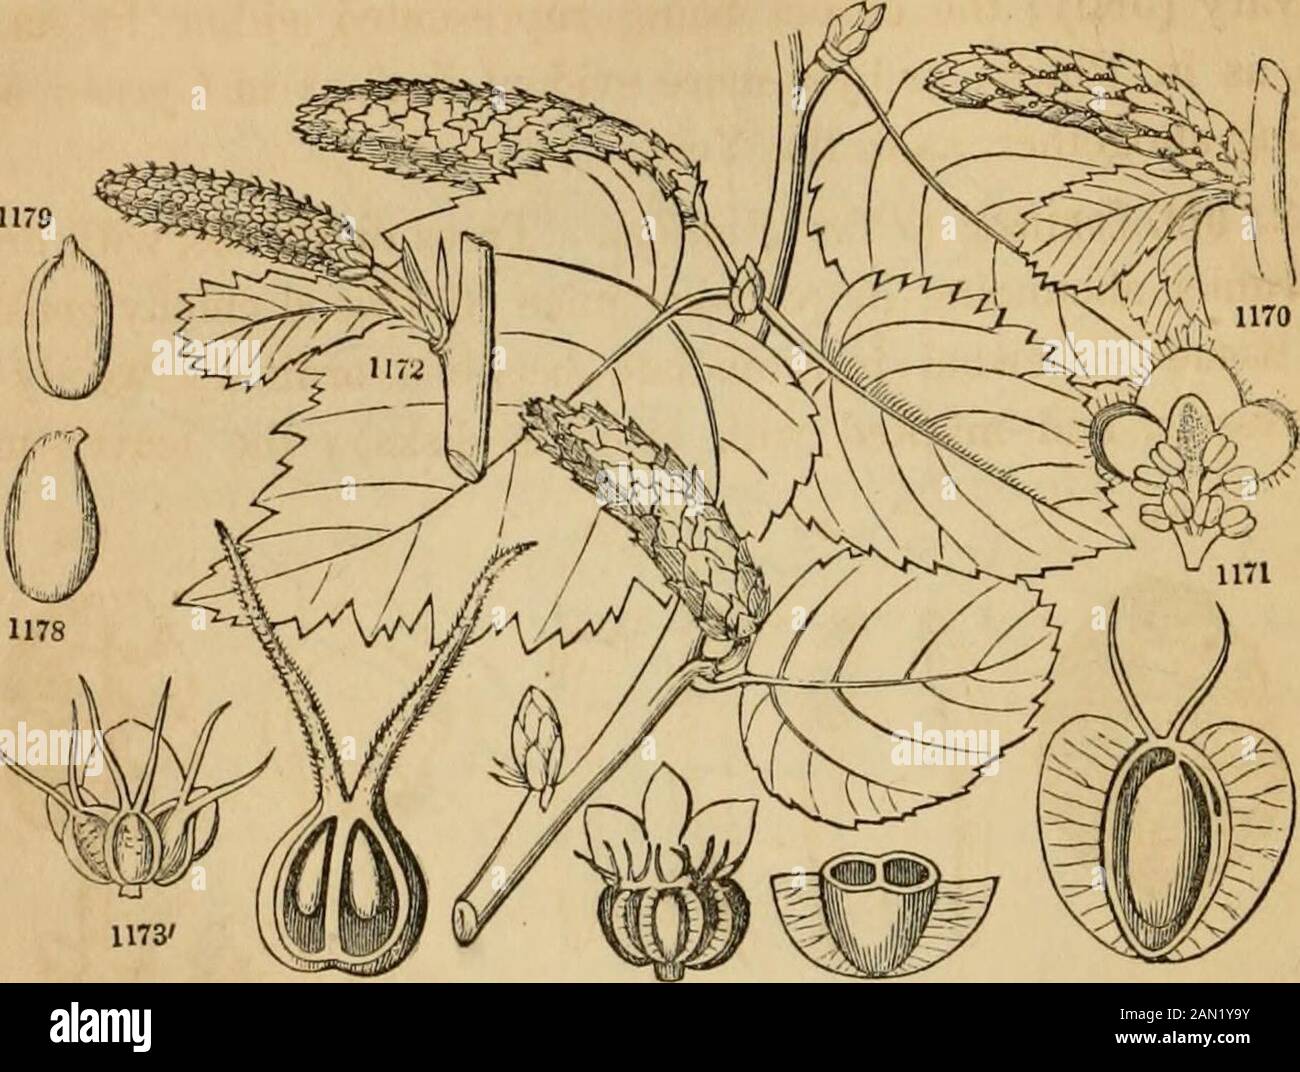 Introduction to structural and systematic botany, and vegetable physiology, : being a 5th and revedof the Botanical text-book, illustrated with over thirteen hundred woodcuts . ommonly achlamydeous, placed three together in the axil of eachthree-lobed bract. Stamens definite. Ovary two-celled, each cellwith one suspended ovule: styles or stigmas distinct. Fruit mem-branaceous or samara-like, one-celled and one-seeded, forming withthe three-lobed bracts a kind of strobile. Albumen none. — Ex.Betula (the Birch), Alnus (Alder). The bark is sometimes astrin- FIG. 1164. Quercus Chinquapin in fruit: Stock Photo